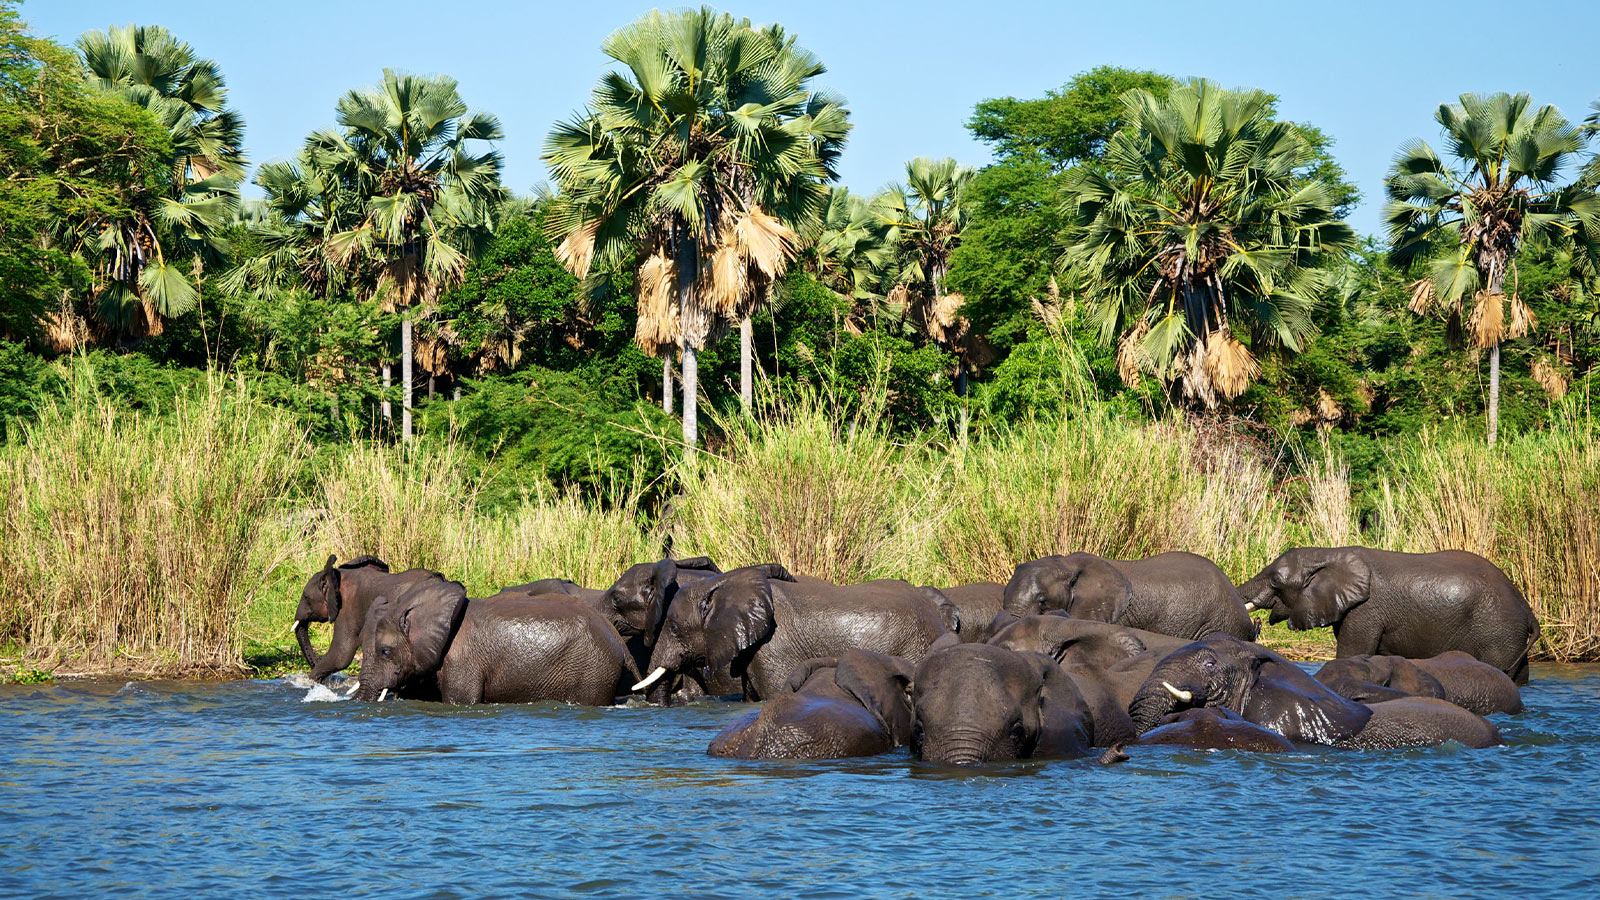 Elephants gathered together drinking water from the river